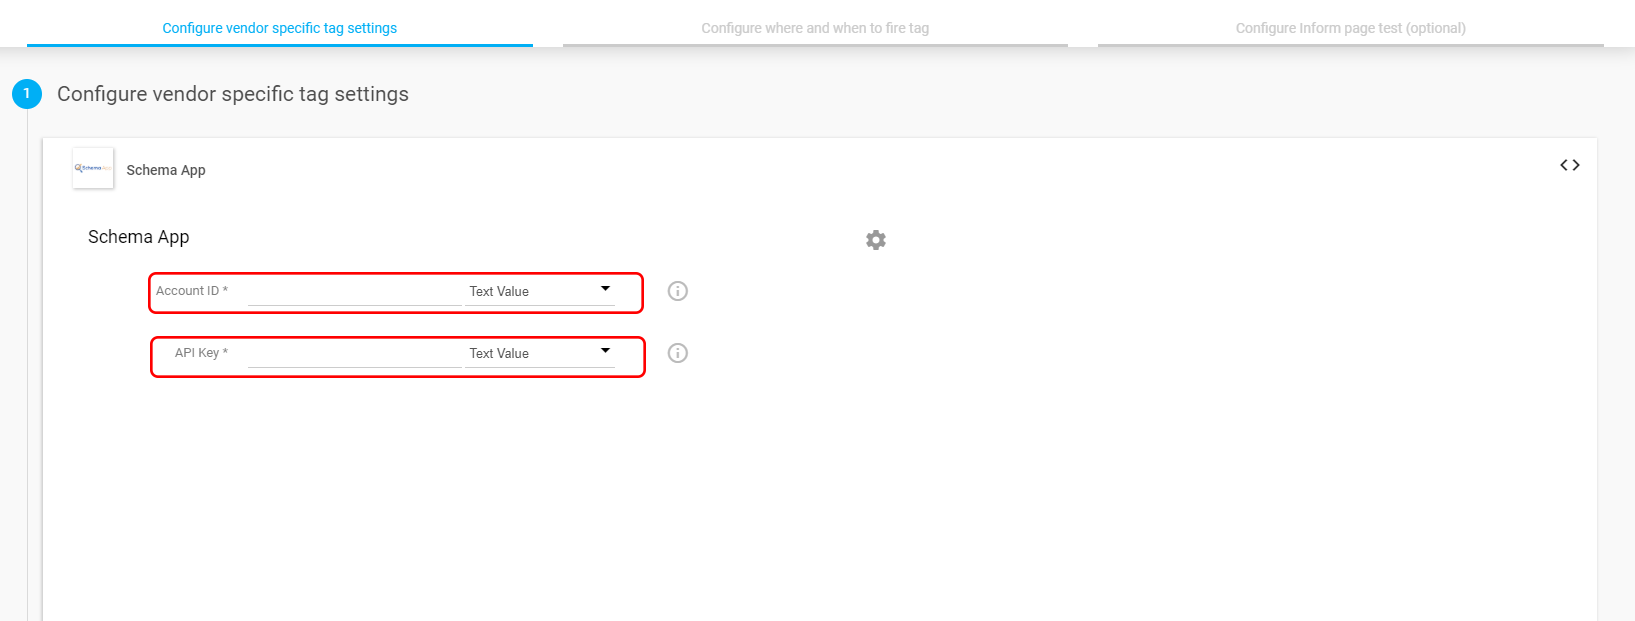 “Configure vender specific tag settings” - step 2